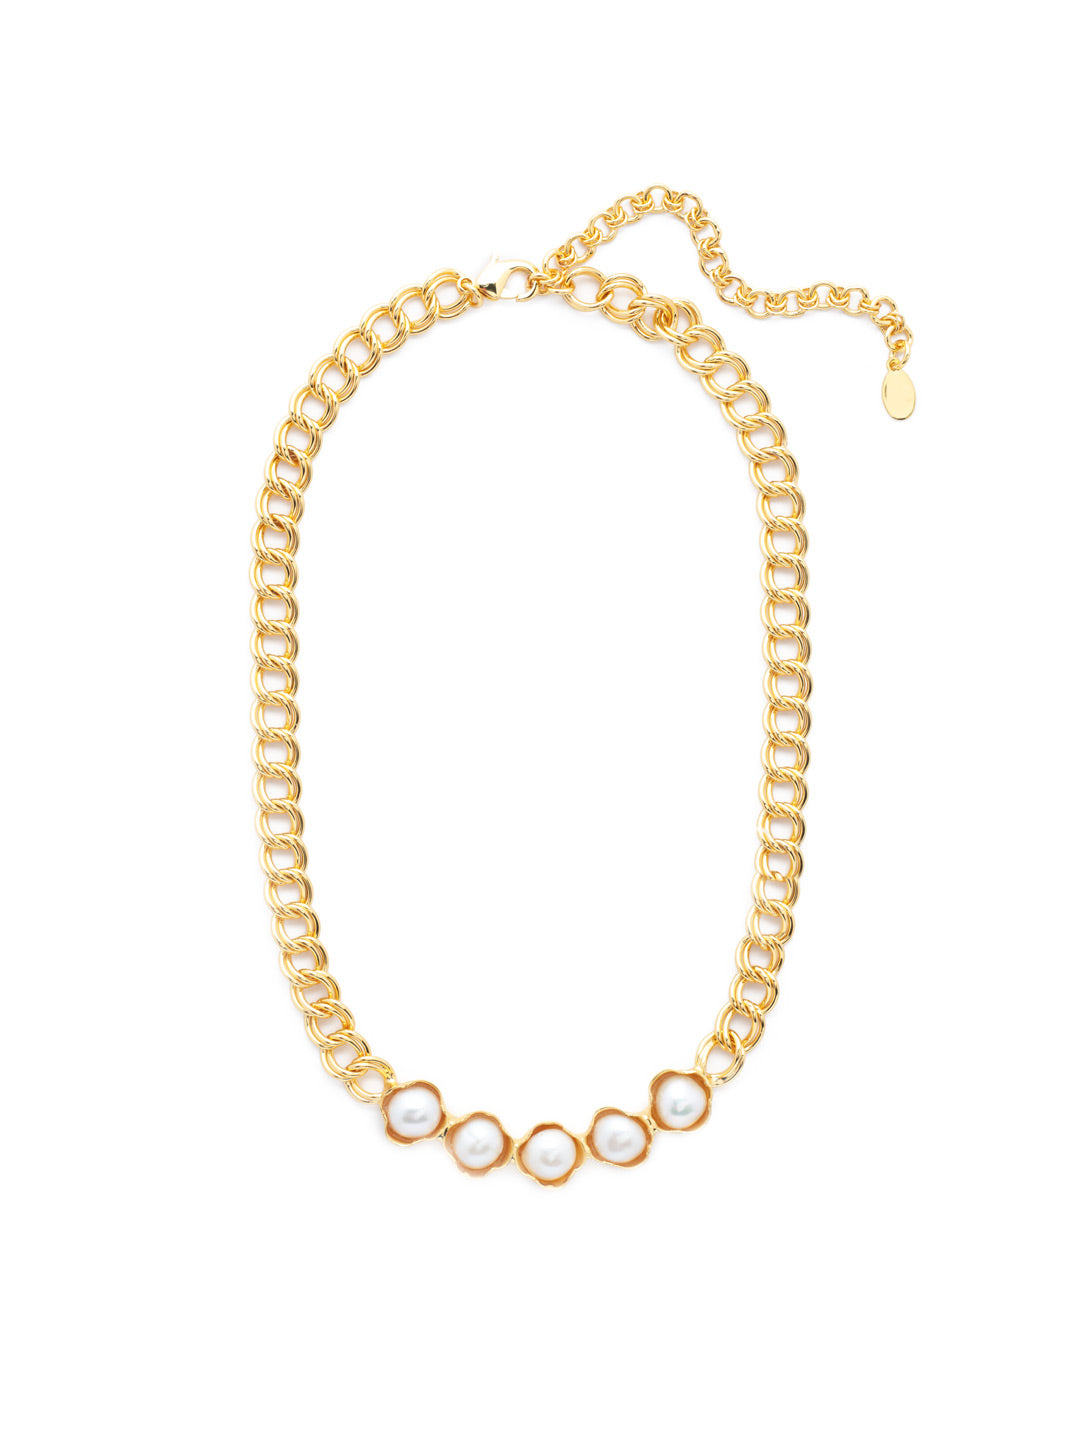 Leah Tennis Necklace - 4NEV8BGMDP - <p>The Leah Tennis Necklace is the perfect mix of classic and modern styles; five freshwater pearls meet at the base of an adjustable chunky metal chain. From Sorrelli's Modern Pearl collection in our Bright Gold-tone finish.</p>